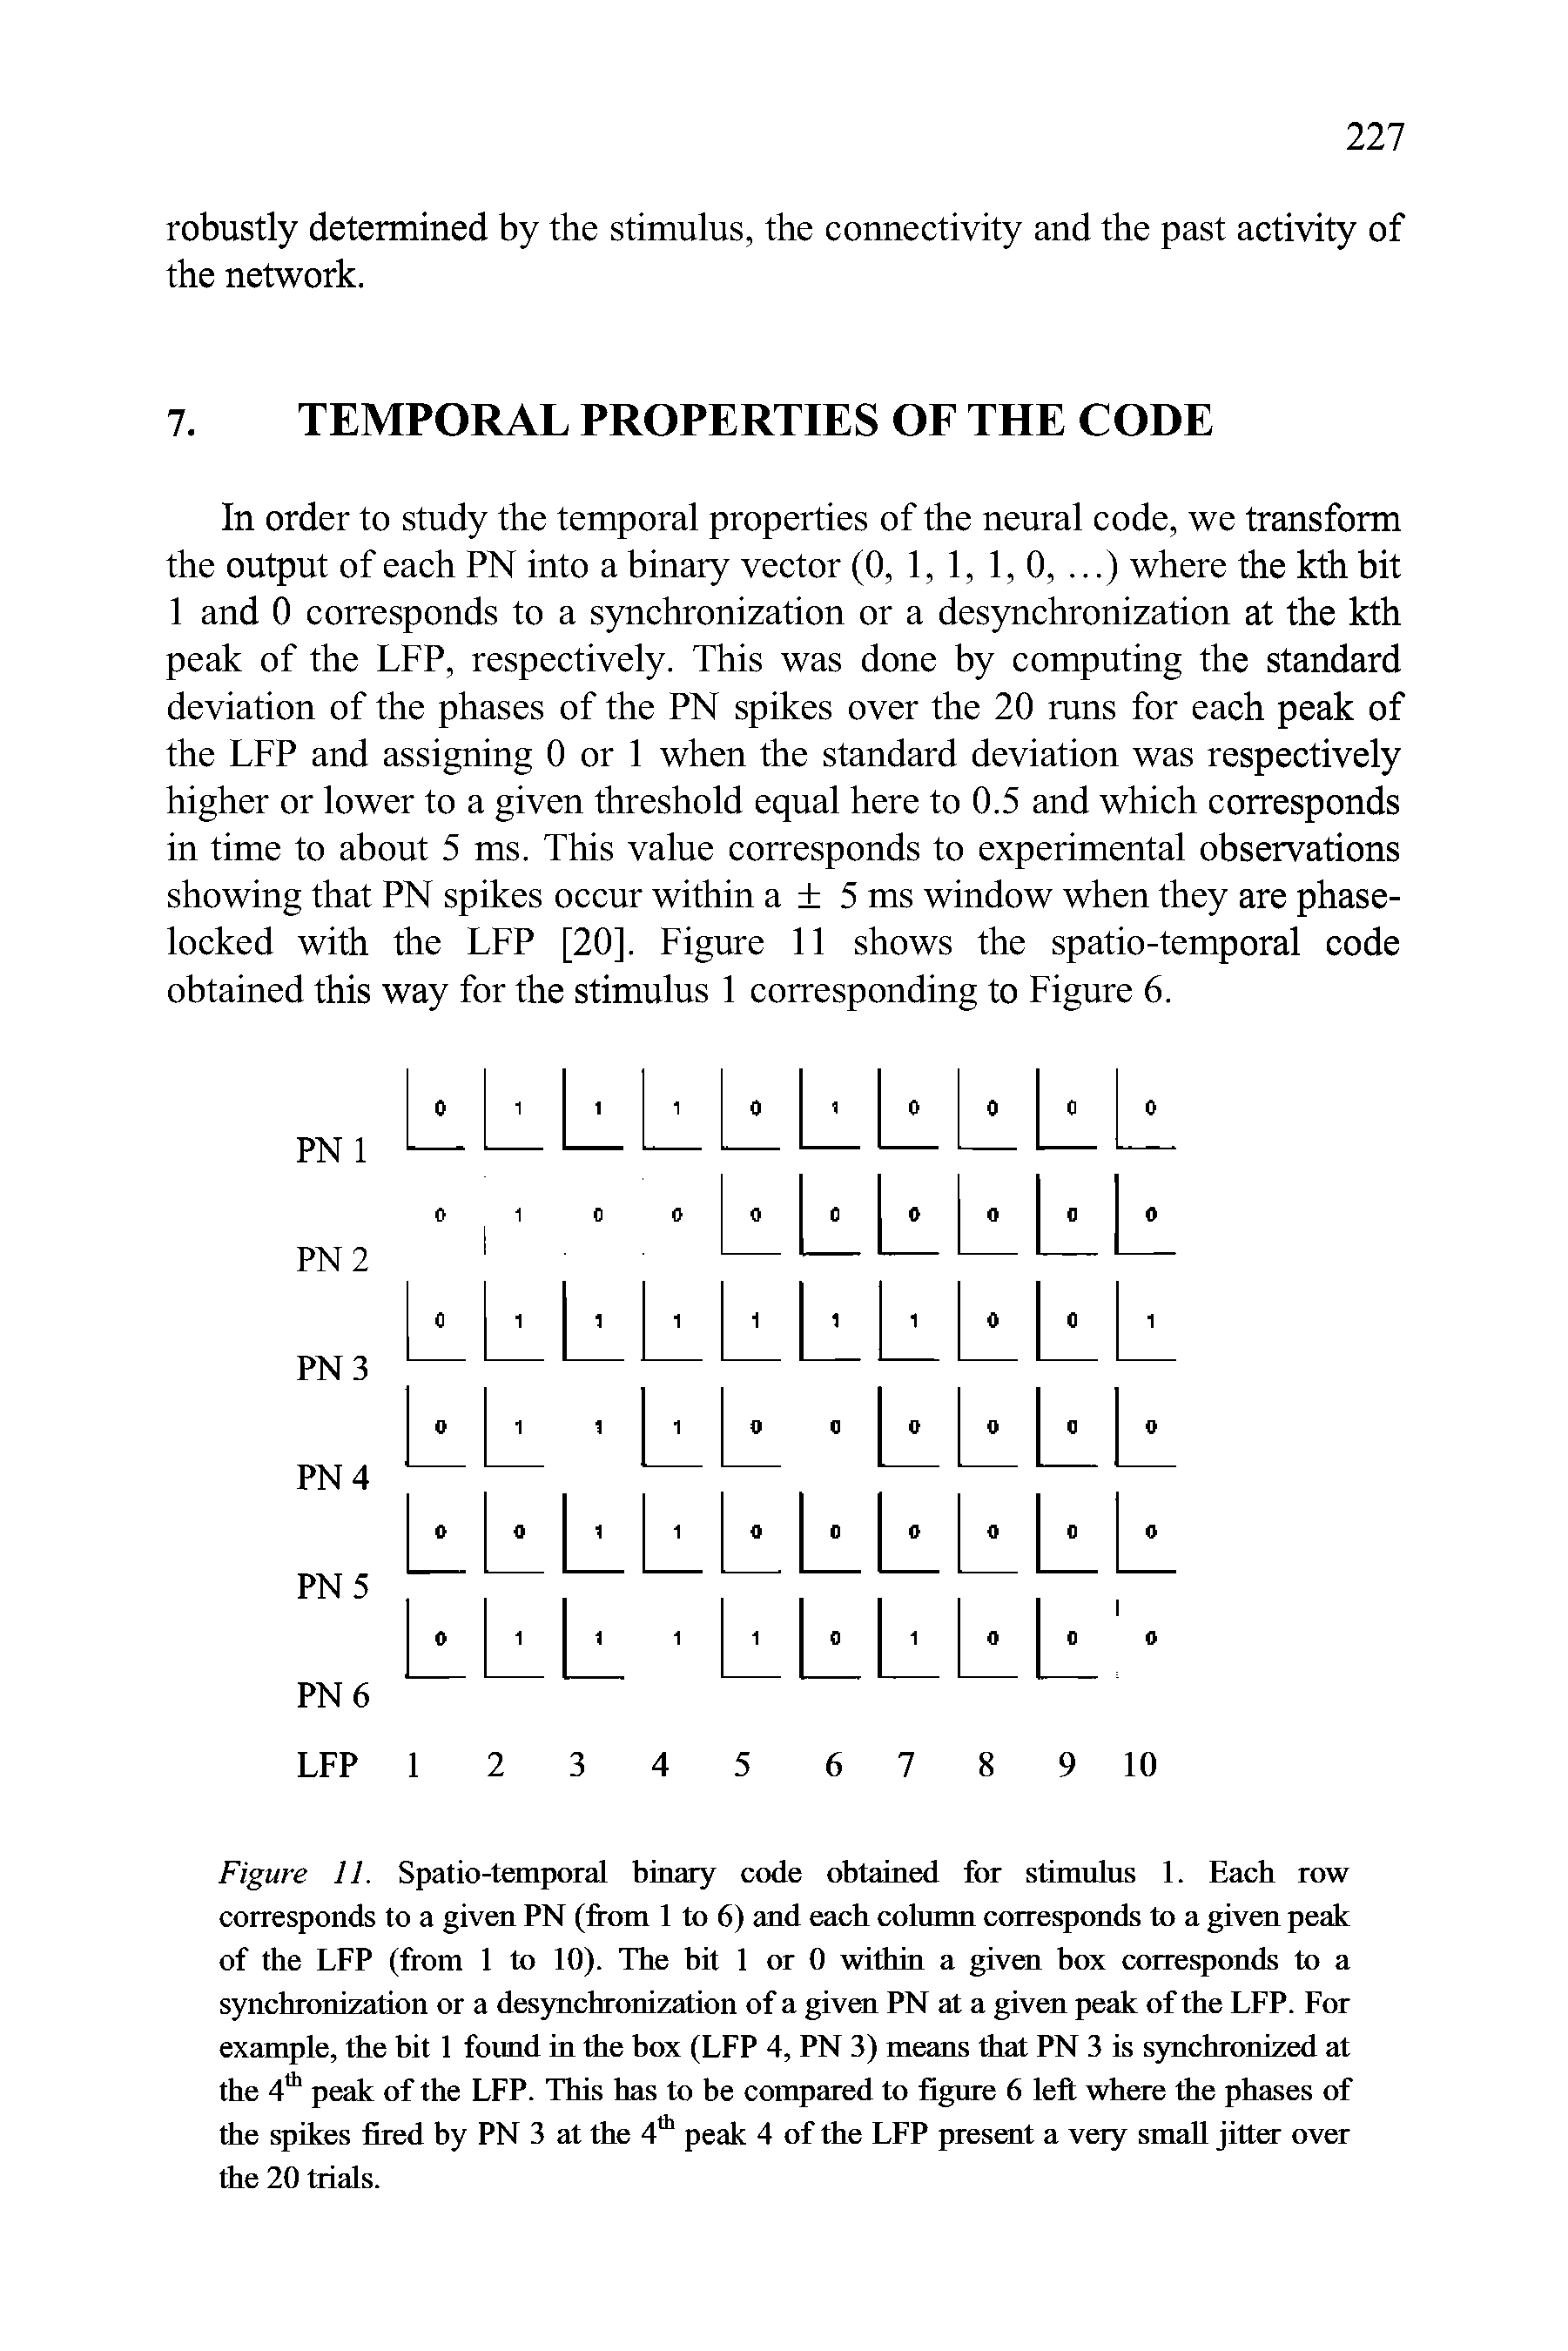 Figure 11. Spatio-temporal binary code obtained for stimulns 1. Each row corresponds to a given PN (from 1 to 6) and each column corresponds to a given peak of the LFP (from 1 to 10). The hit 1 or 0 within a given box corresponds to a synchronization or a desynchronization of a given PN at a given peak of the LFP. For example, the bit 1 foimd in the box (LFP 4, PN 3) means that PN 3 is synchronized at the 4 peak of the LFP. This has to be compared to figure 6 left where the phases of the spikes fired by PN 3 at the 4 peak 4 of the LFP present a very small jitter over the 20 trials.